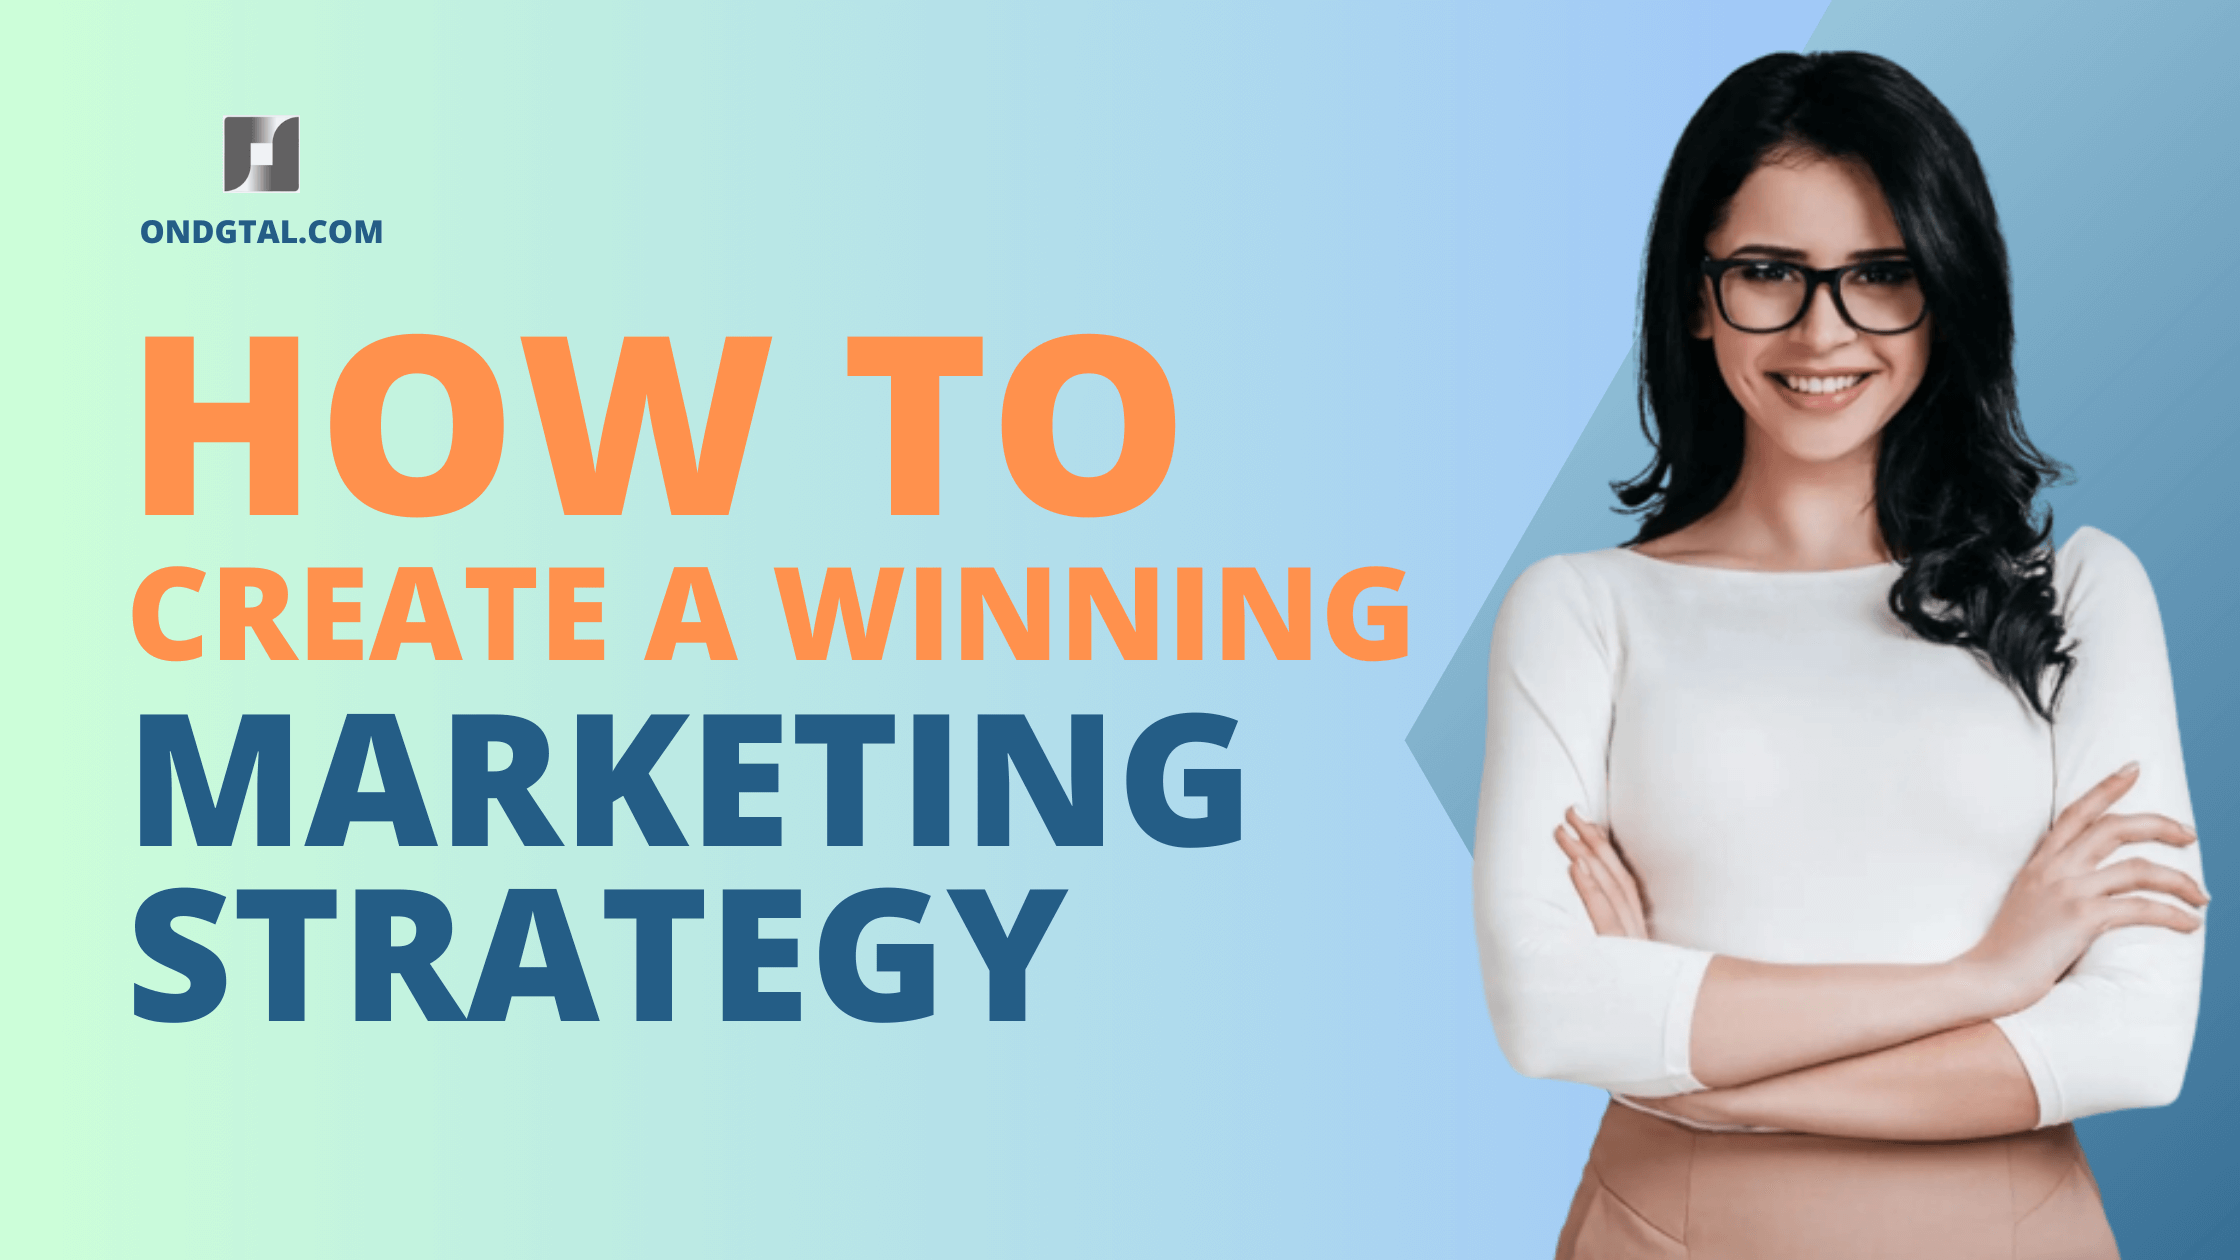 How to Create a winning marketing strategy